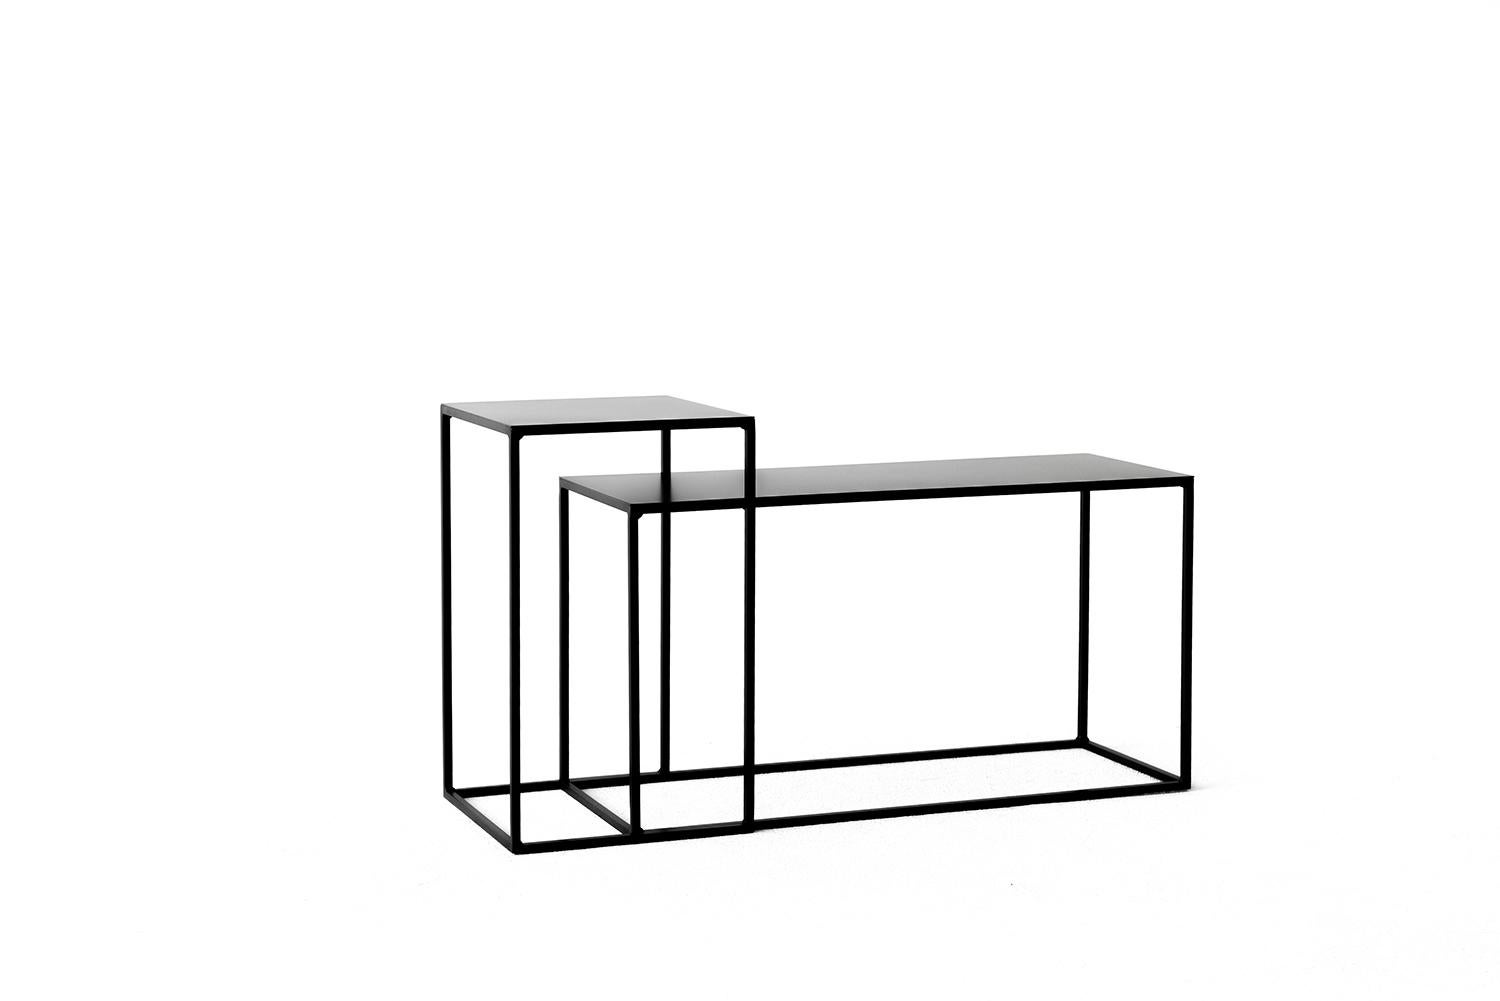 Object 008 console table by NG Design.
Dimensions: D90 x W30 x H50 cm.
Materials: powder coated steel.

Also available: All of objects available in different materials and colors on demand. 

A steel console designed to please the eye itself,